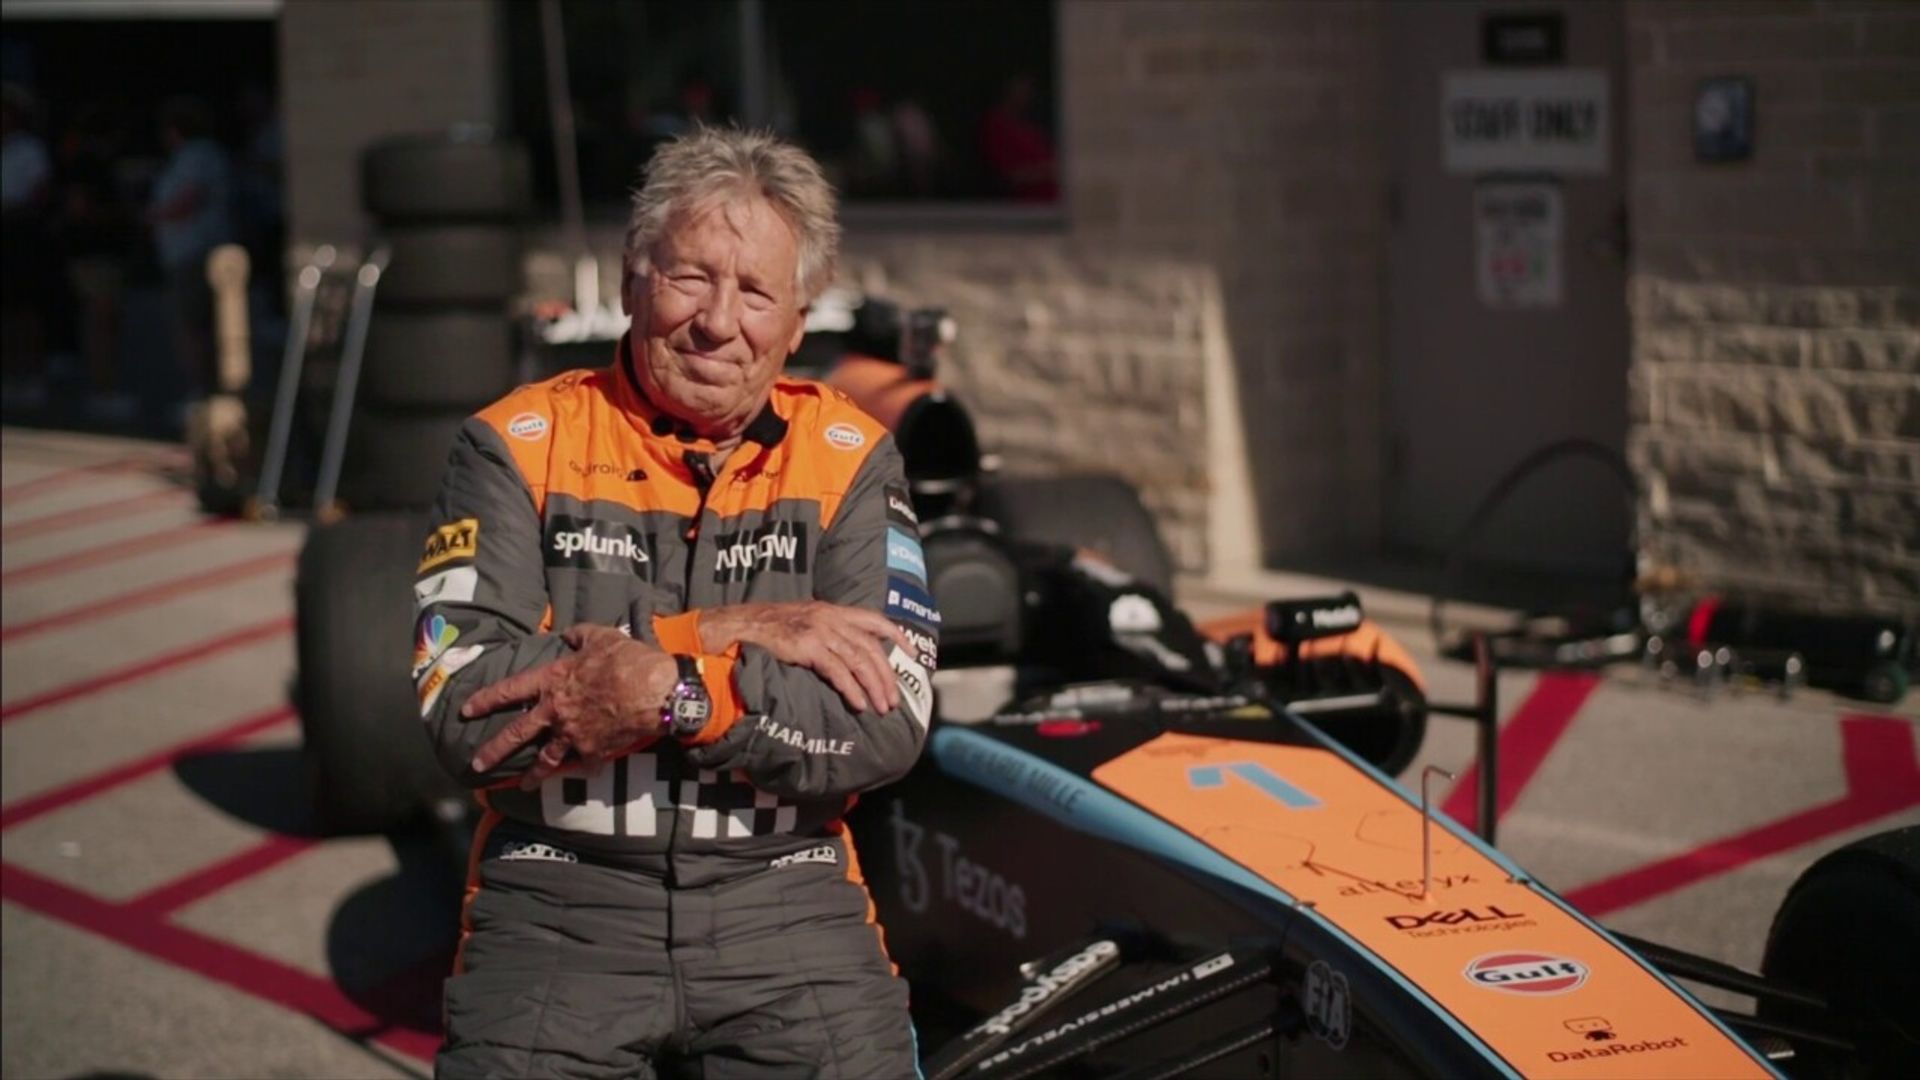 'Hope I can reach the pedals!' | 82-year-old Andretti gets back on the track